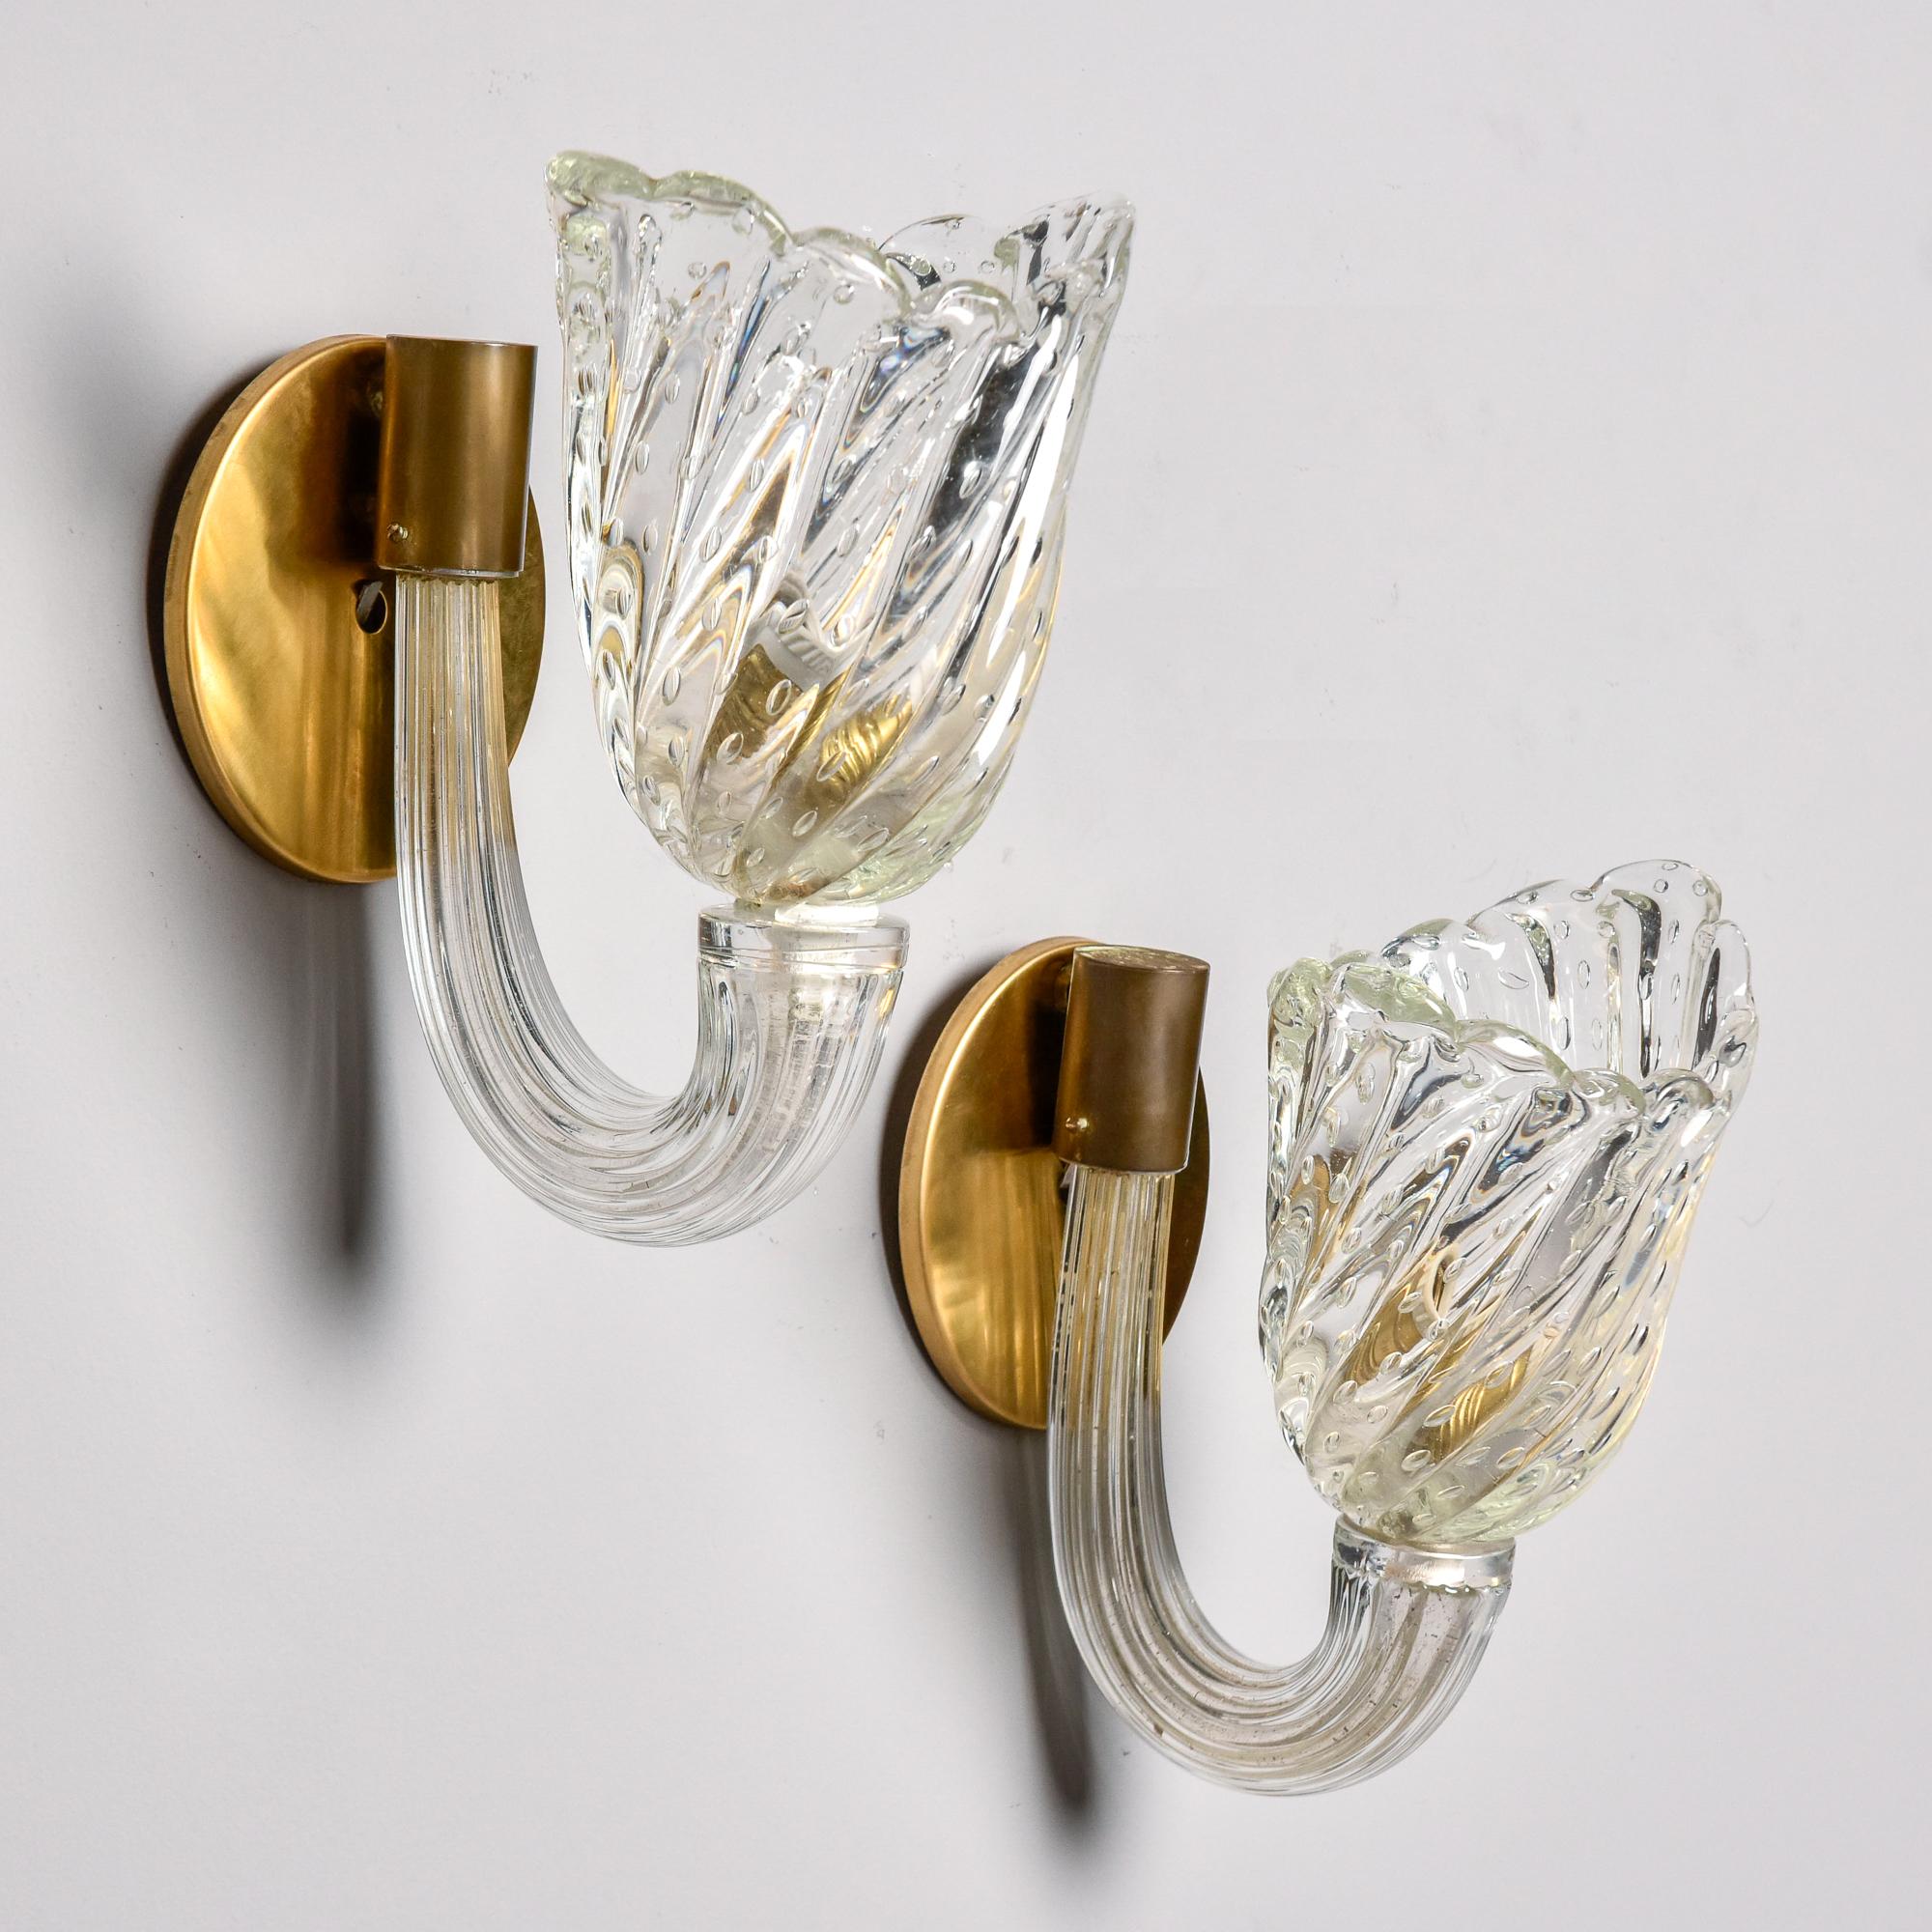 Found in Italy and attributed to Venini, these Murano glass sconces date from the 1950s. Each sconce has a round brass back plate, a single, thick ridged clear glass arm and ridged, tulip-form globe/shade with scalloped rim and bullicante